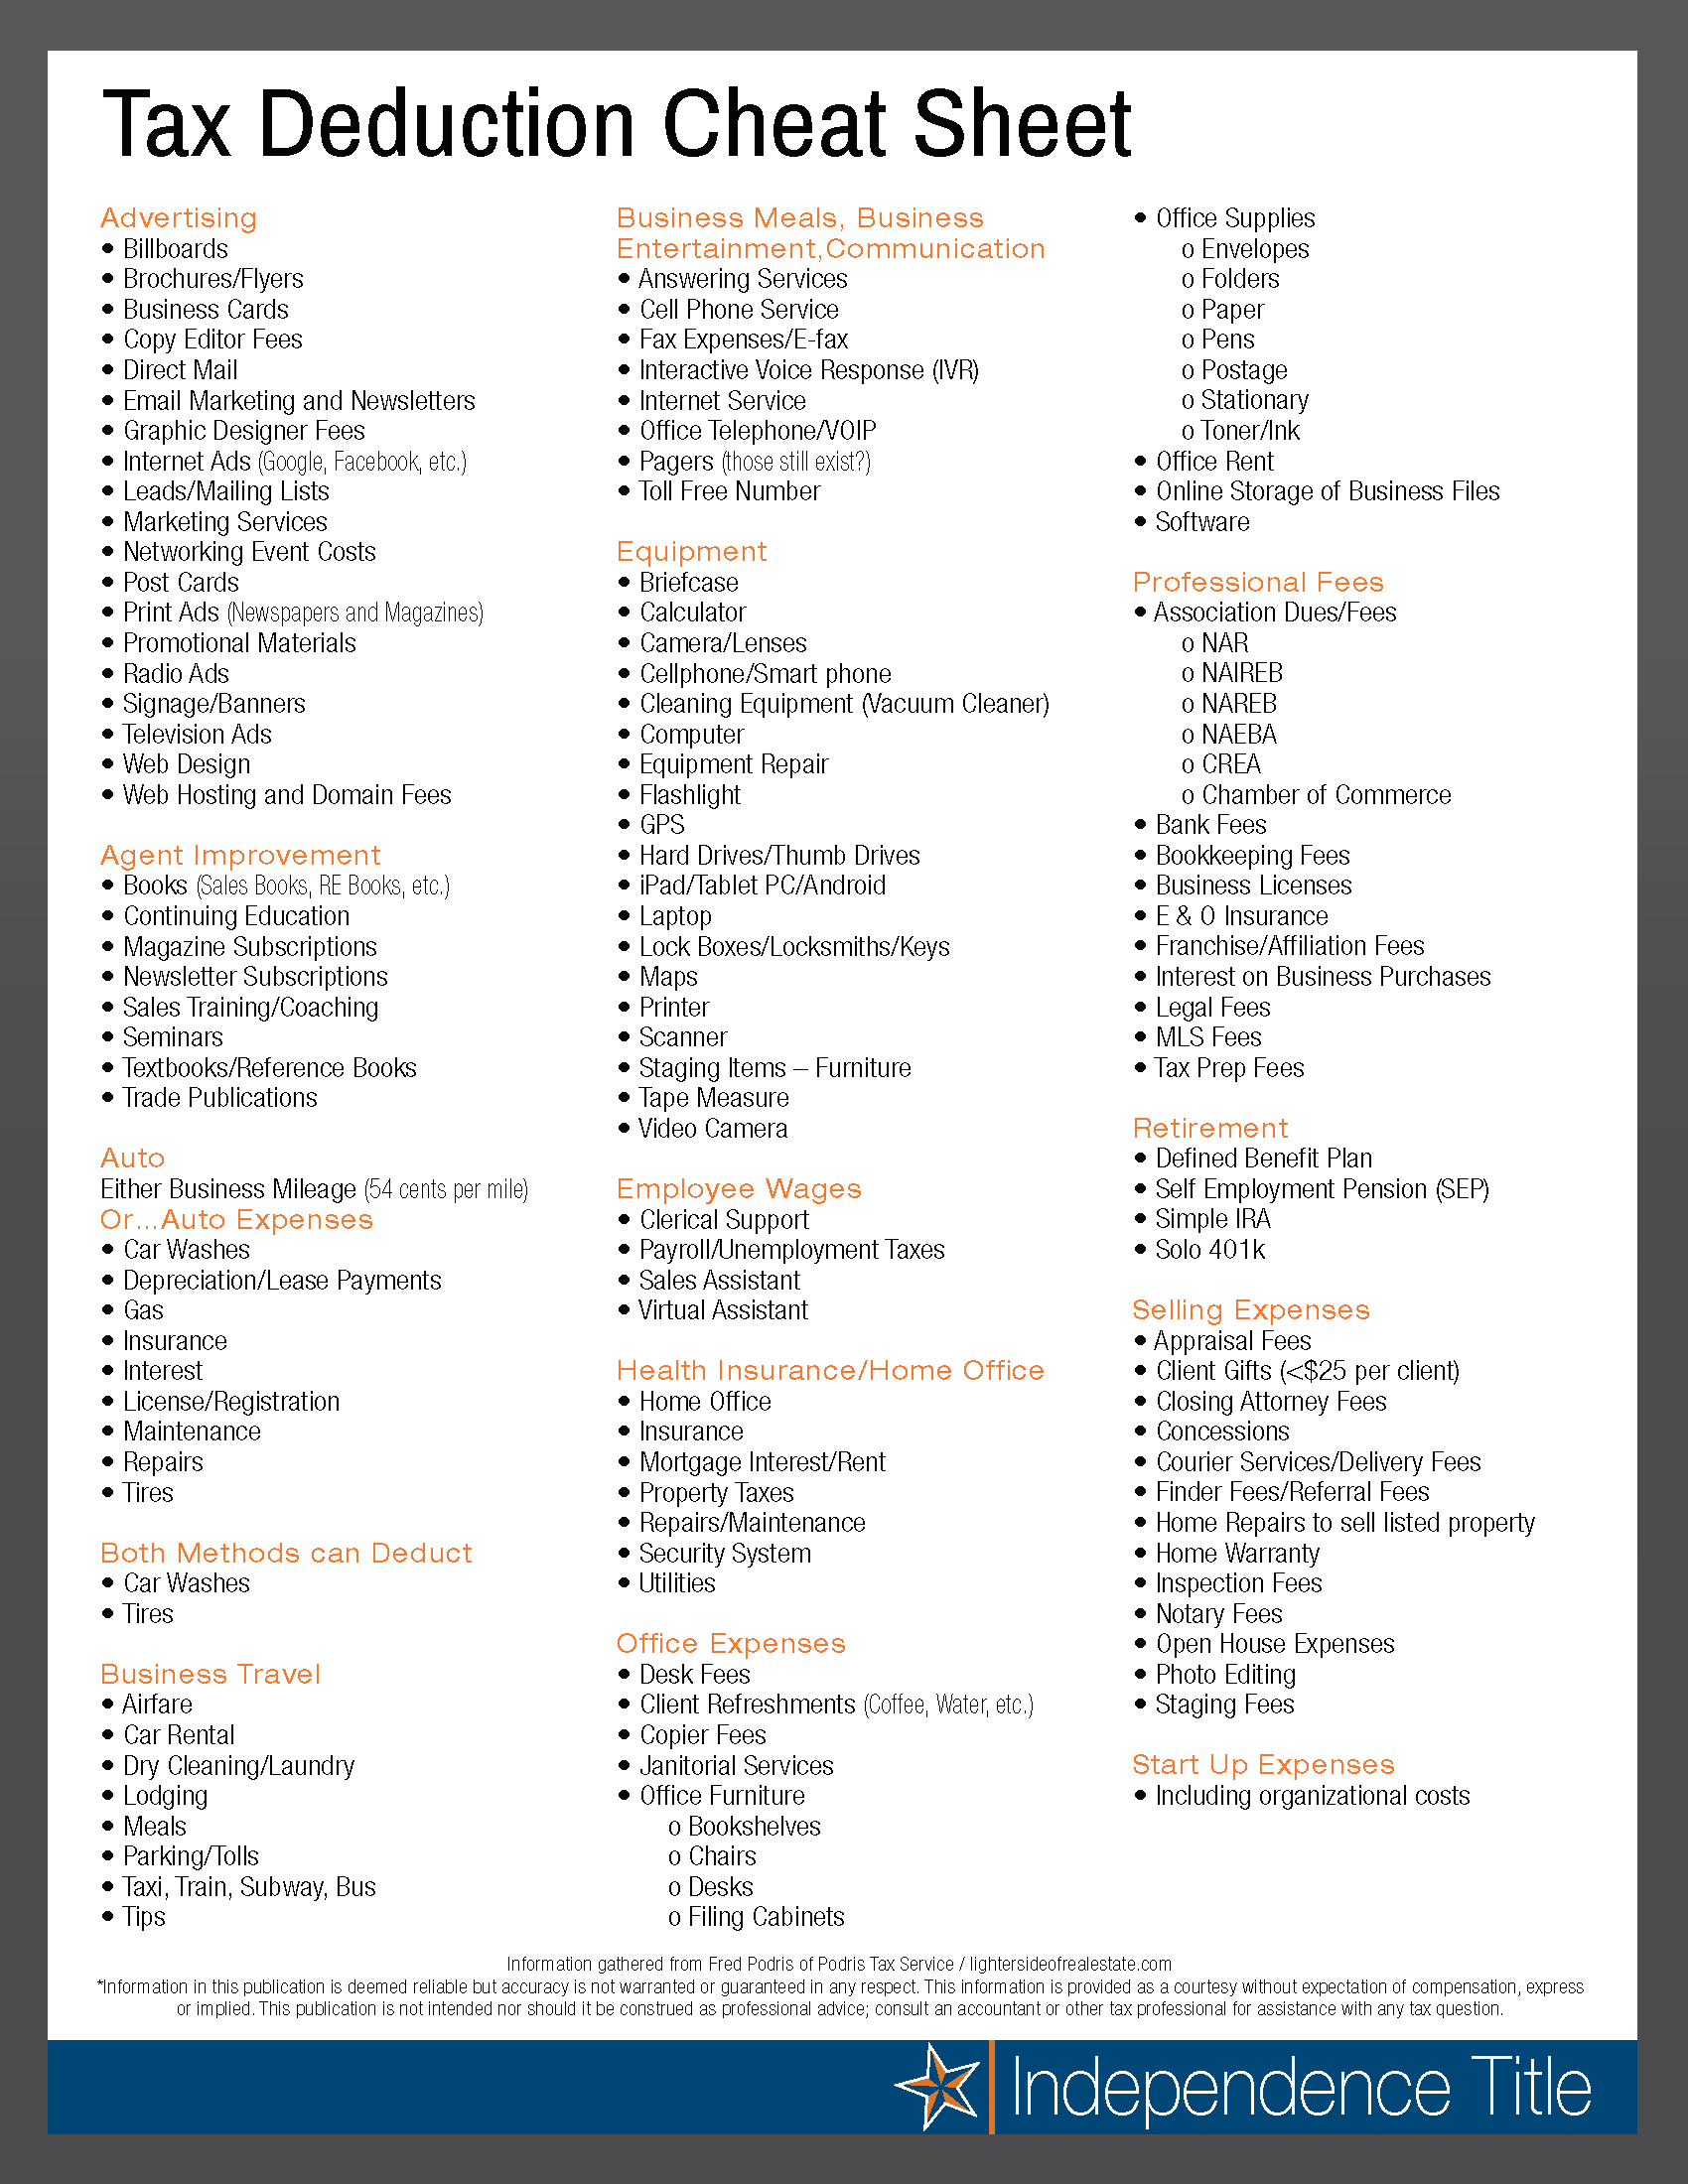 Tax Deduction Cheat Sheet For Real Estate Agents  Independence Title Along With Itemized Deductions Worksheet 2016